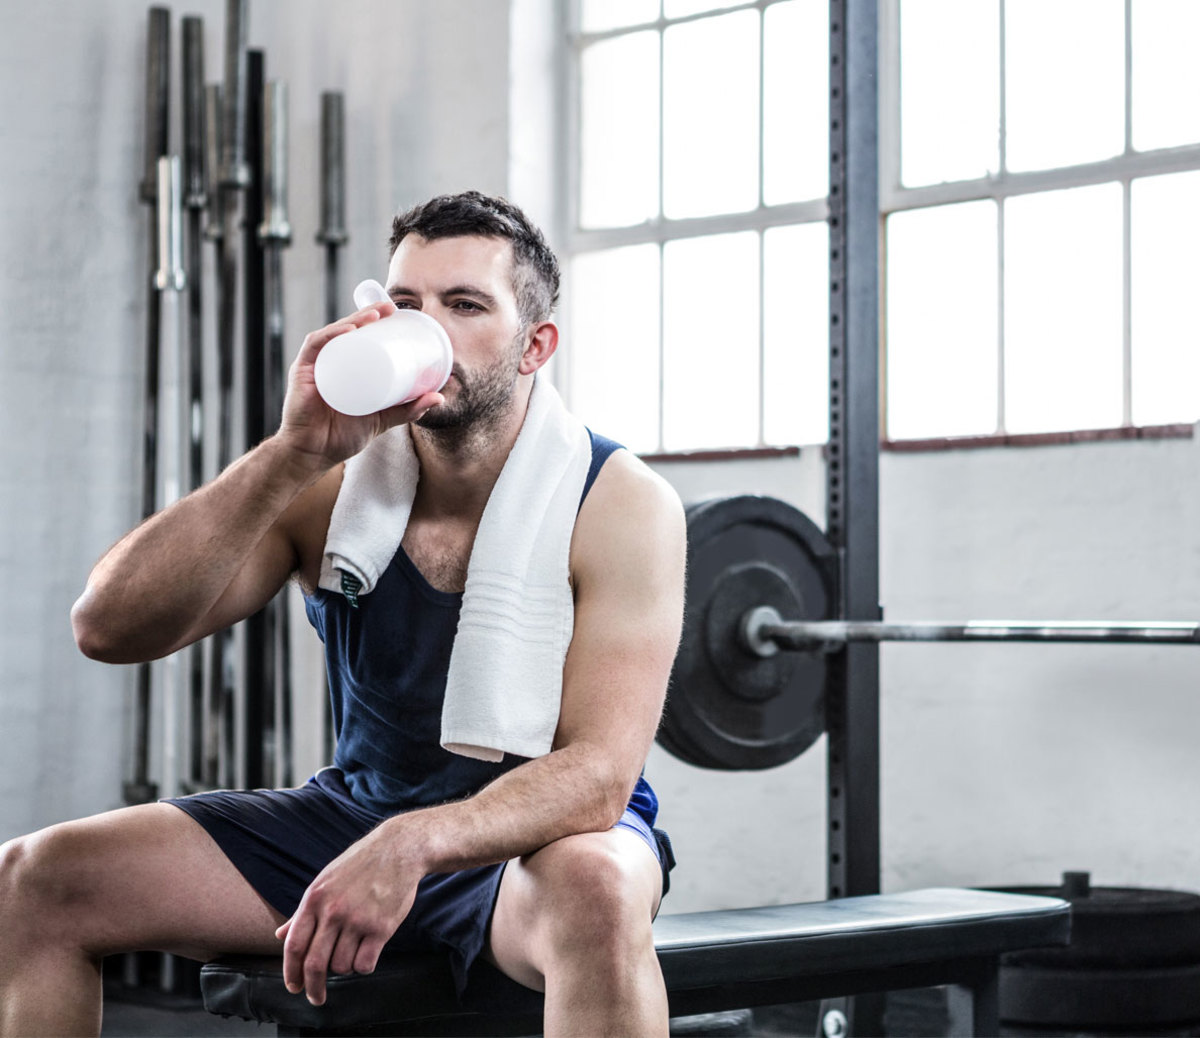 What Happens When You Take Protein Powder Every Day